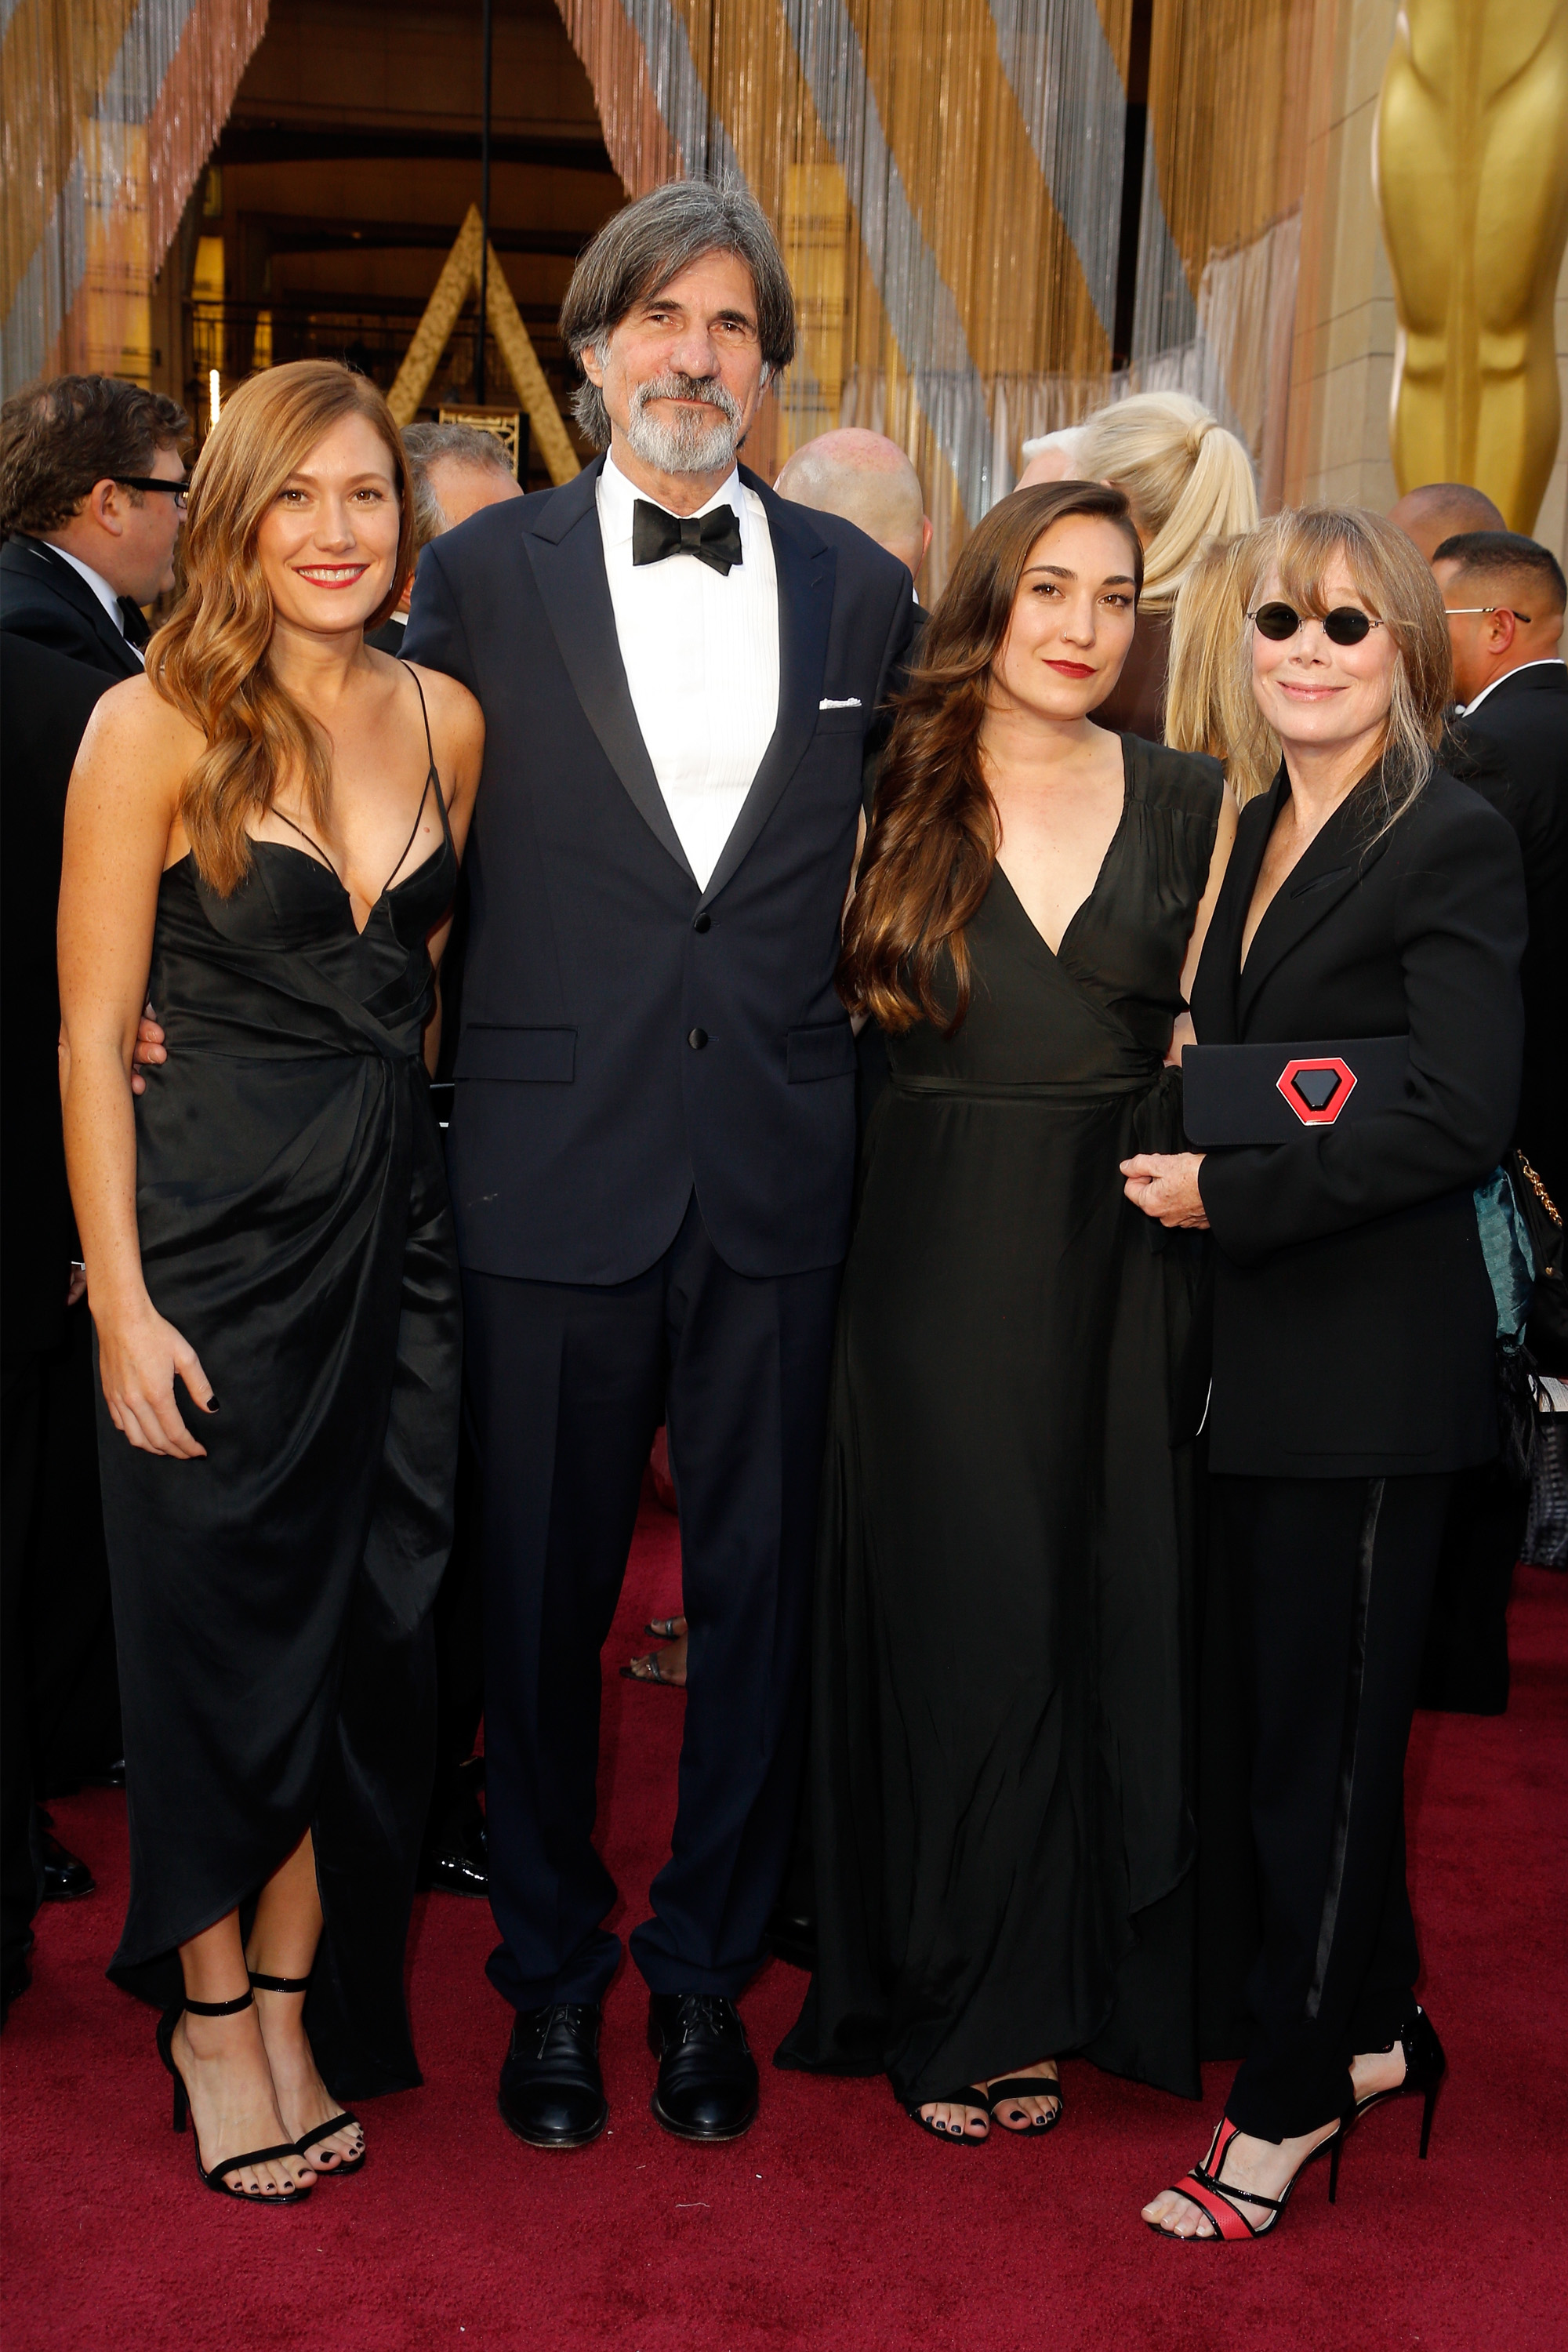 Schuyler Fisk, Jack Fisk, Madison Fisk, and Sissy Spacek during the 88th Annual Academy Awards at Hollywood & Highland Center on February 28, 2016, in Hollywood, California. | Source: Getty Images